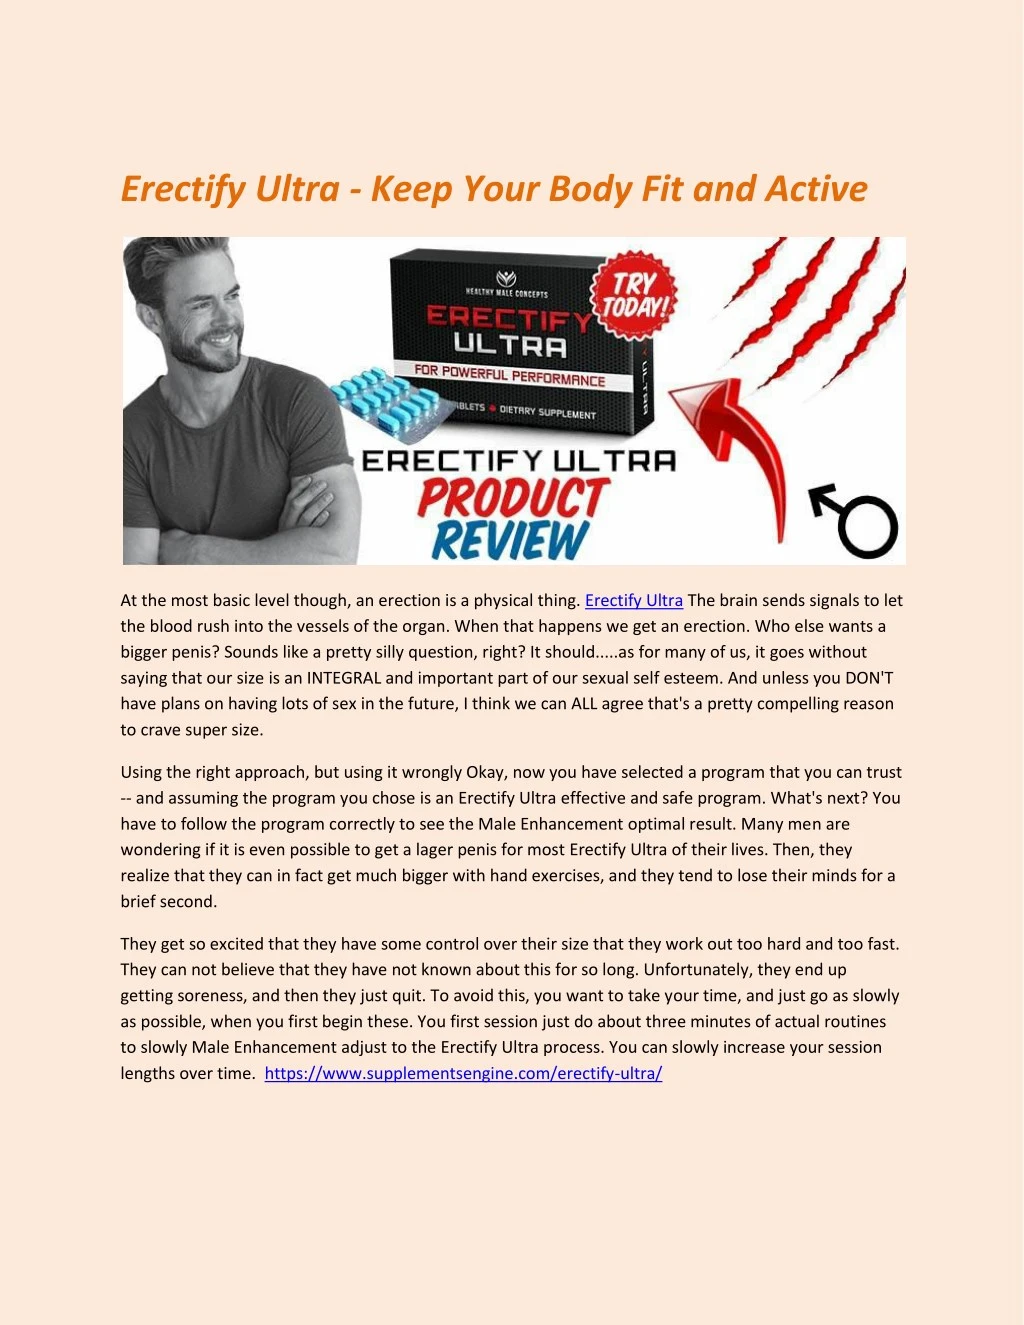 erectify ultra keep your body fit and active